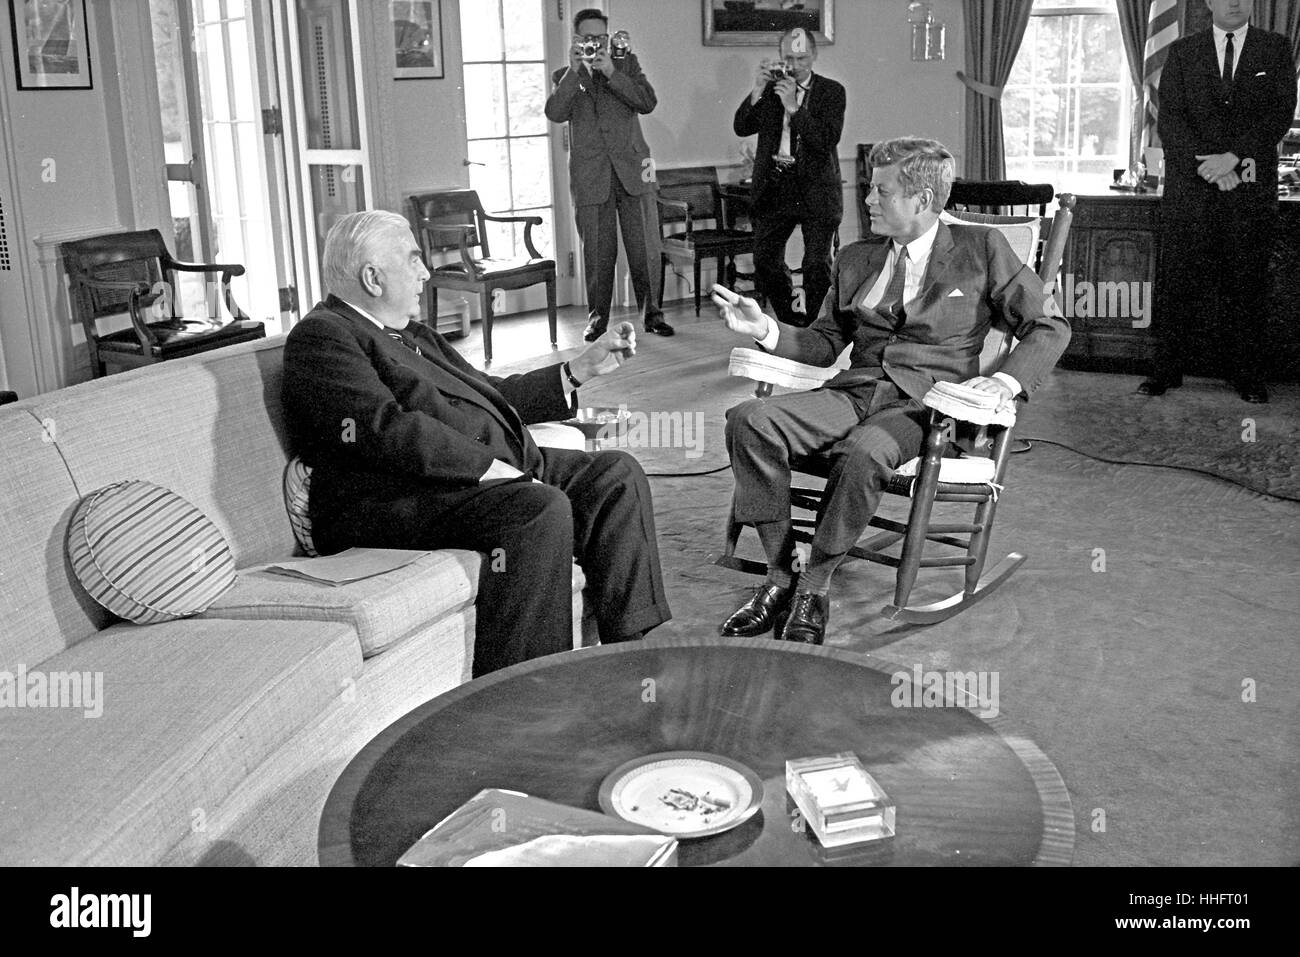 United States President John F. Kennedy (in rocking chair), right, meets with Prime Minister of Australia Robert G. Menzies, left, in the Oval Office of the White House in Washington, DC on September 25, 1962. Credit: Arnie Sachs/CNP - NO WIRE SERVICE - Photo: Arnie Sachs/Consolidated/dpa Stock Photo